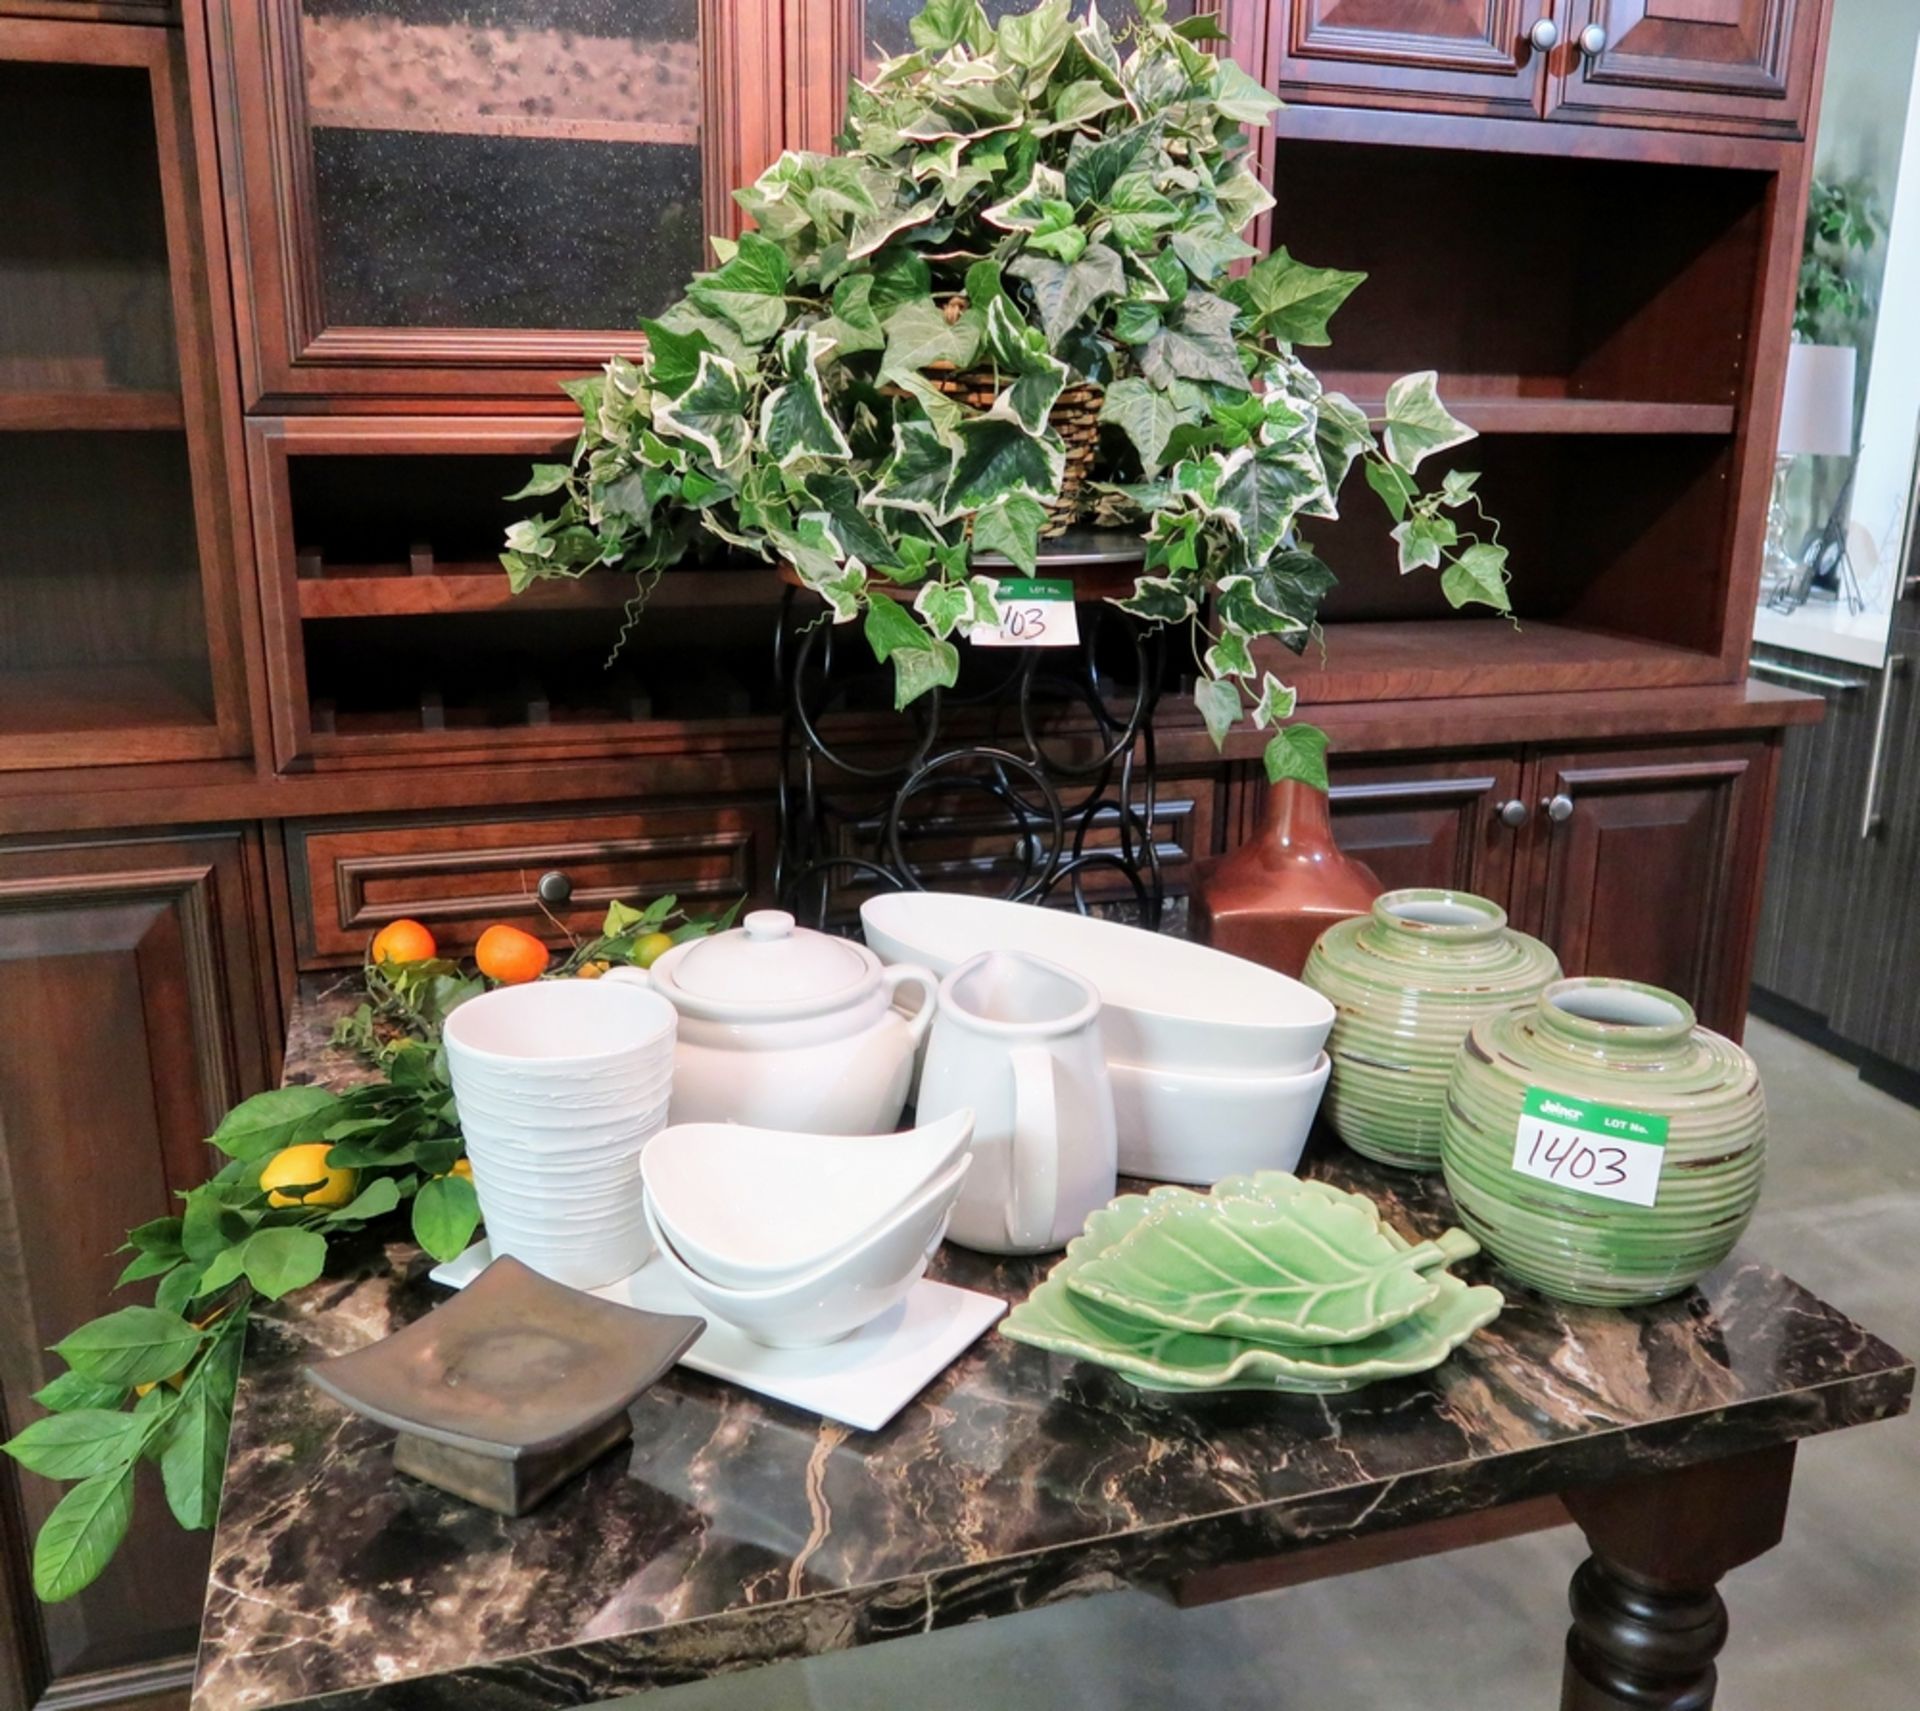 LOT OF KITCHEN DISHWARE, PLANT STAND ETC.